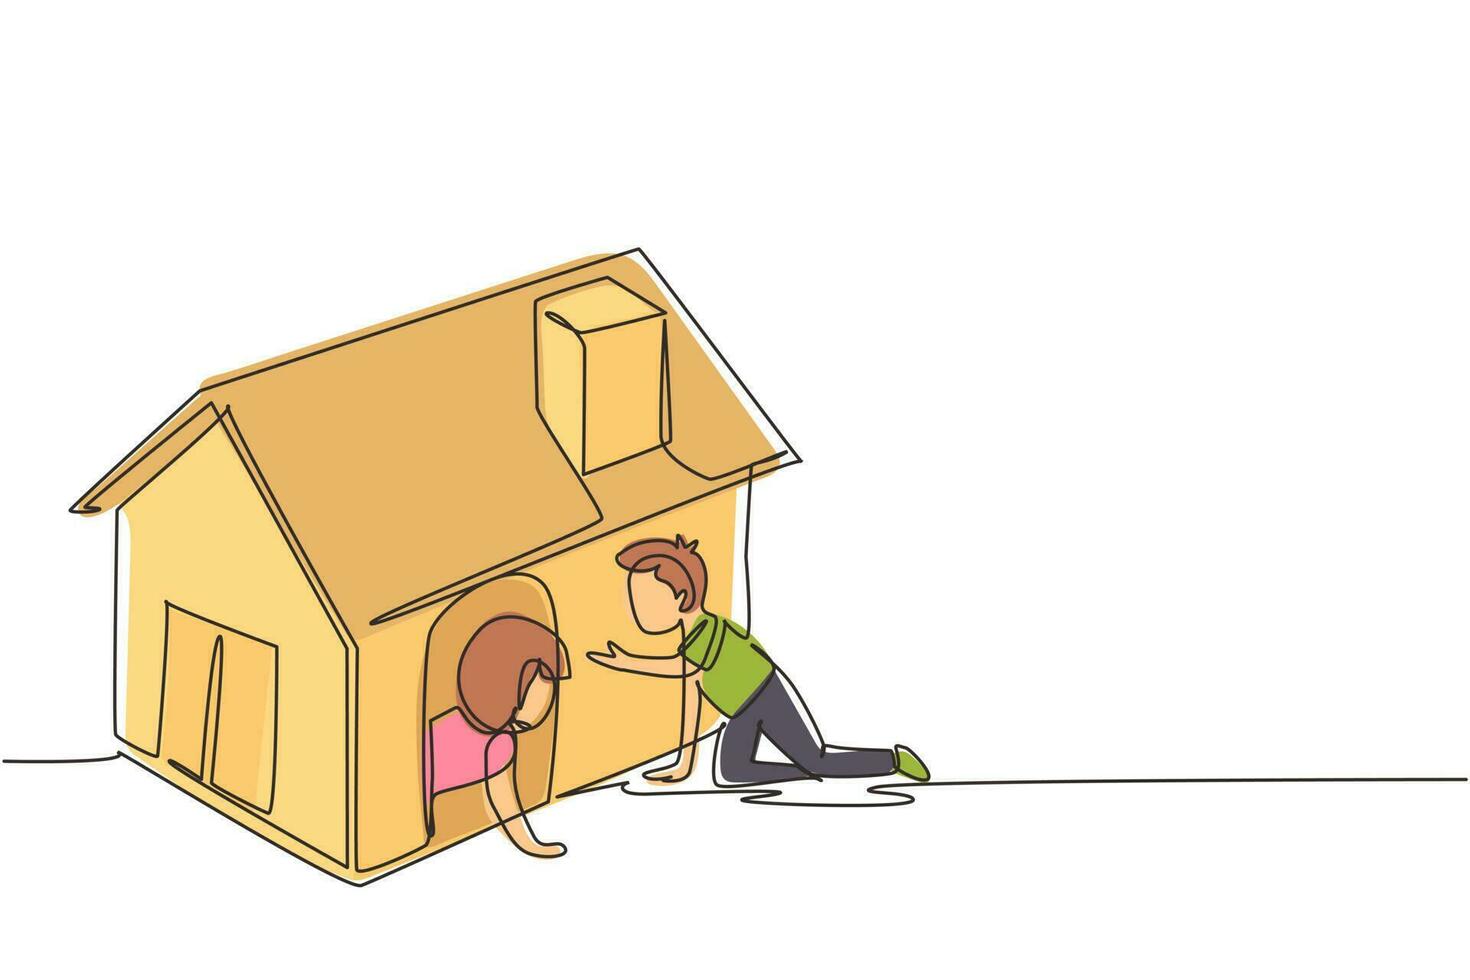 Continuous one line drawing kids playing cardboard box toy house together. Boy and girl playing in and out of toy home. Child sitting in playhouse. Single line draw design vector graphic illustration